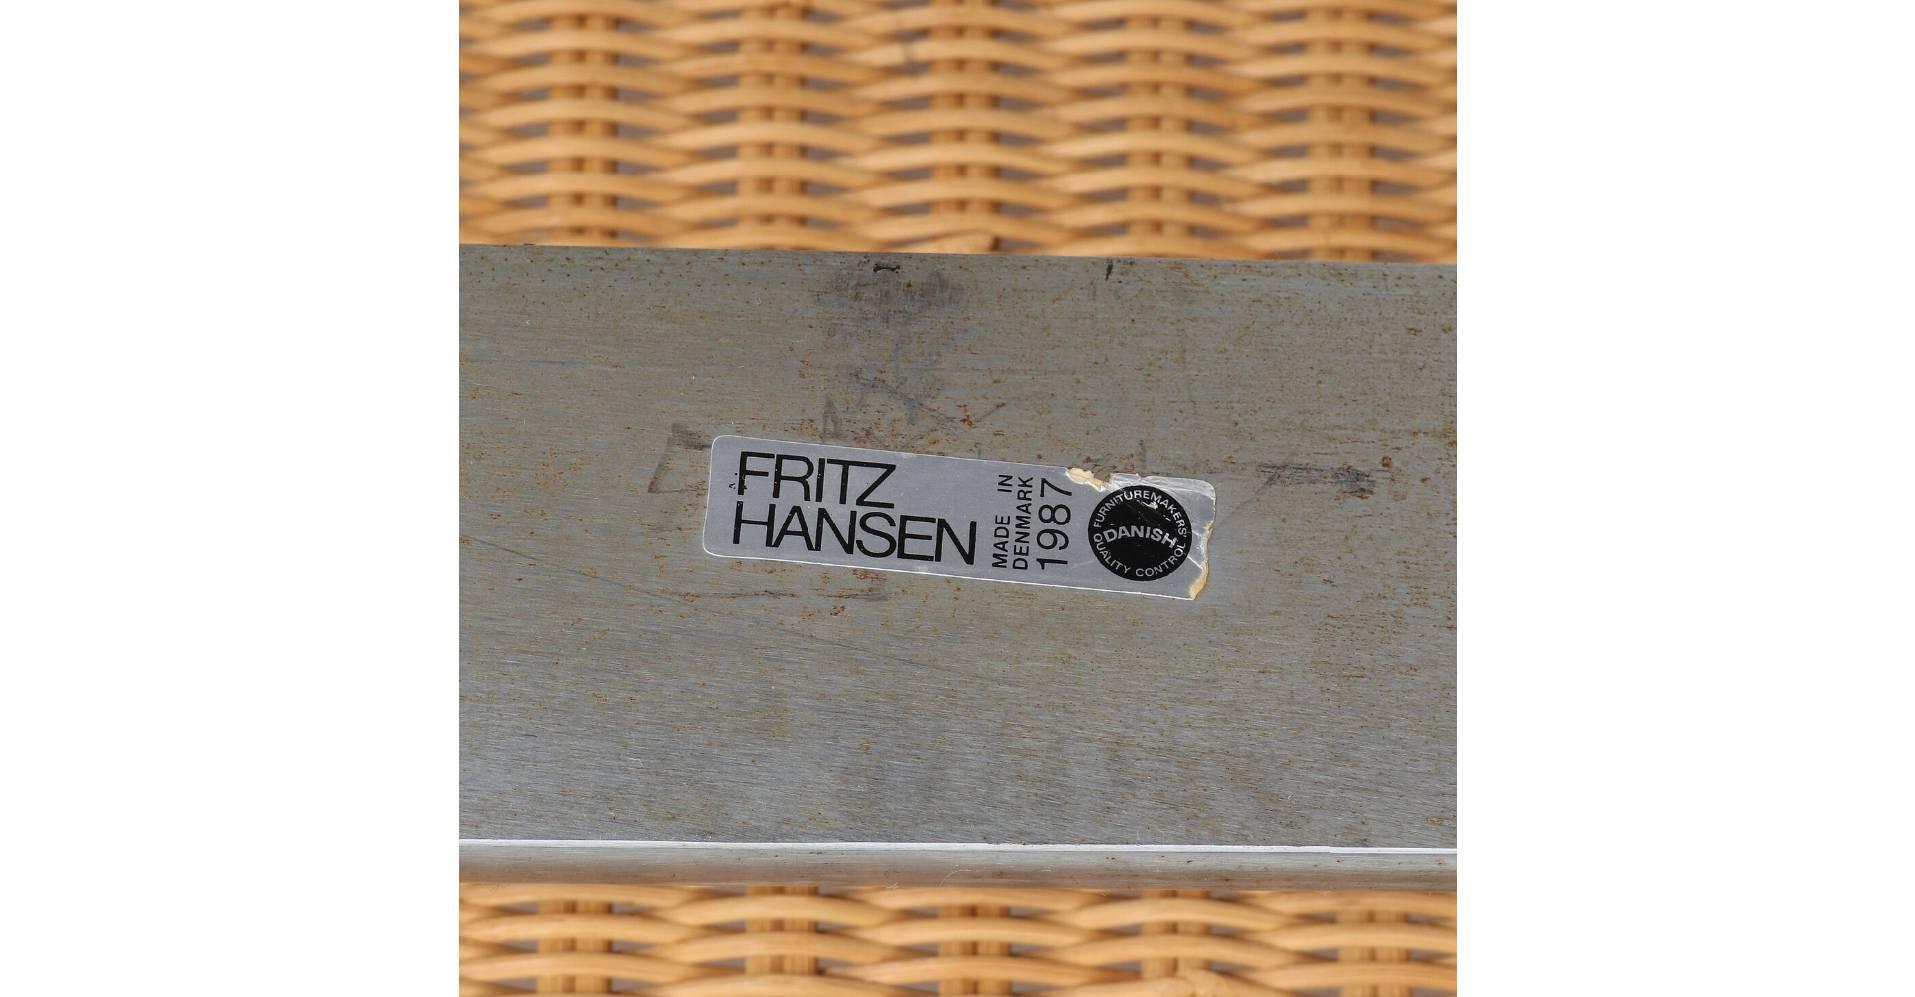 “PK 20”. Easy chair with steel frame, seat and back with woven cane. Designed 1968. Manufactured and marked by Fritz Hansen, 1987.

Condition
Wear due to age and use. Some marks and scratches. Cane with minor defects.